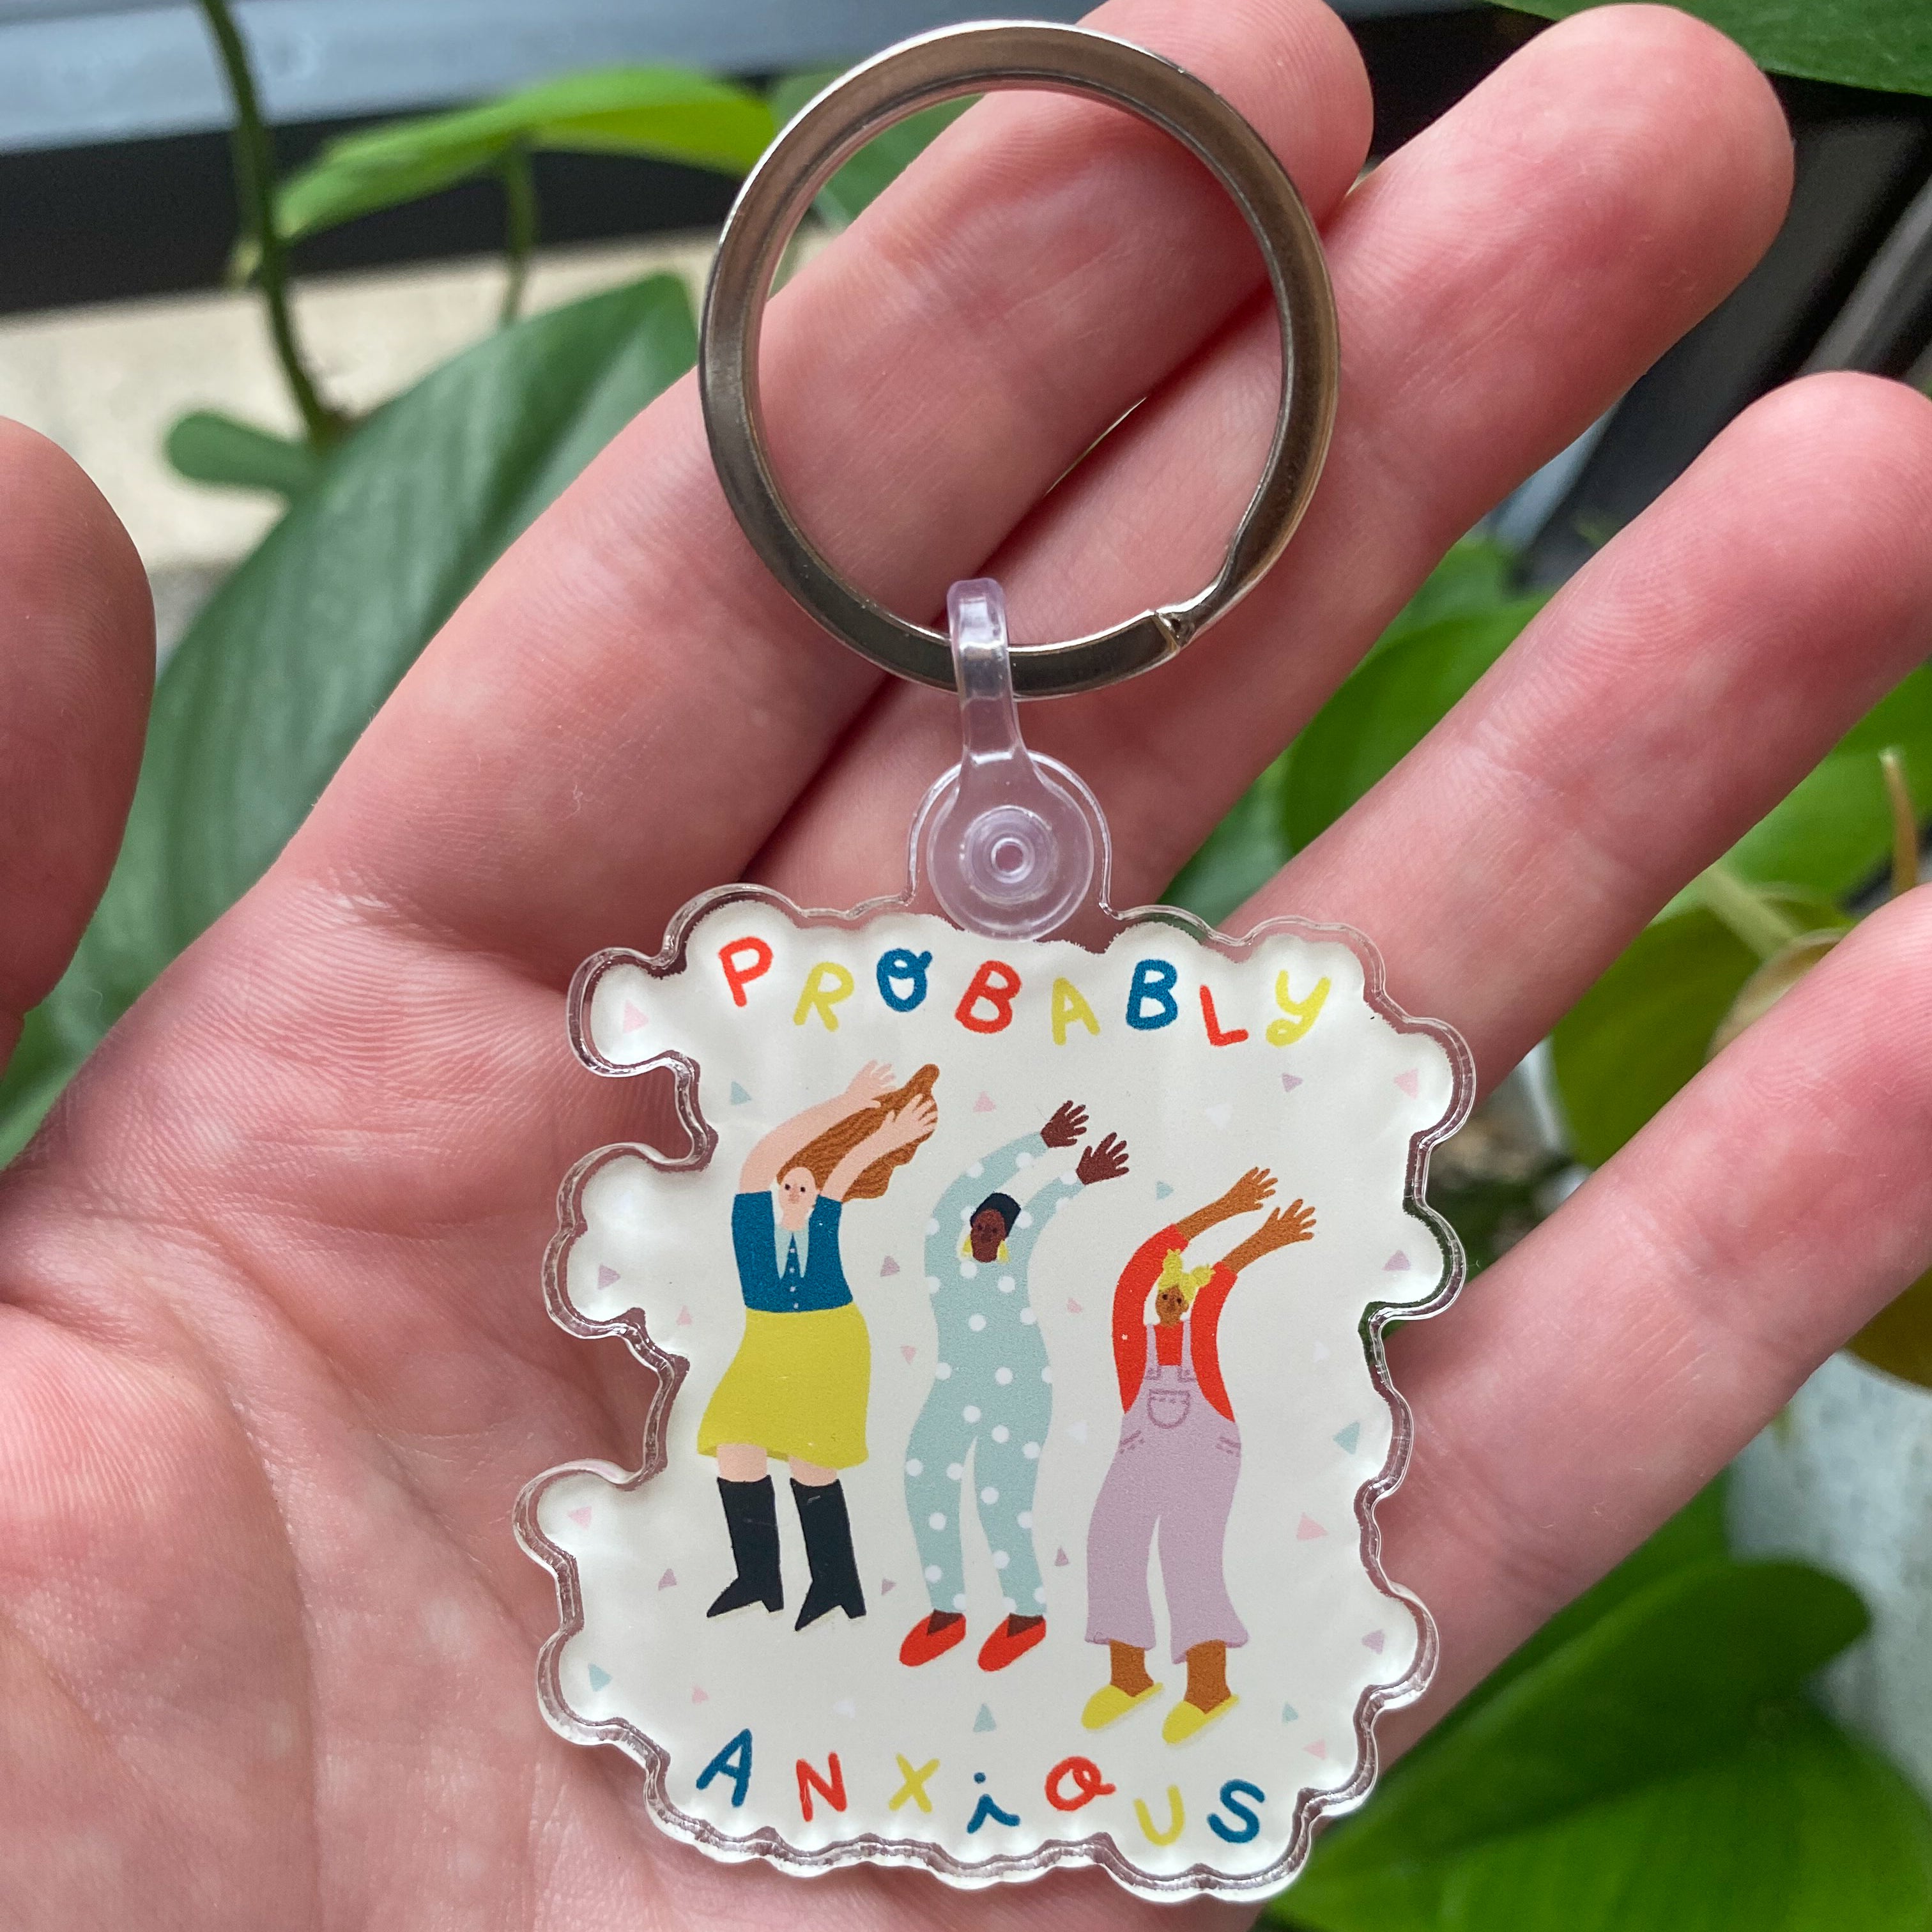 Shrinky Dink Key Chains - from